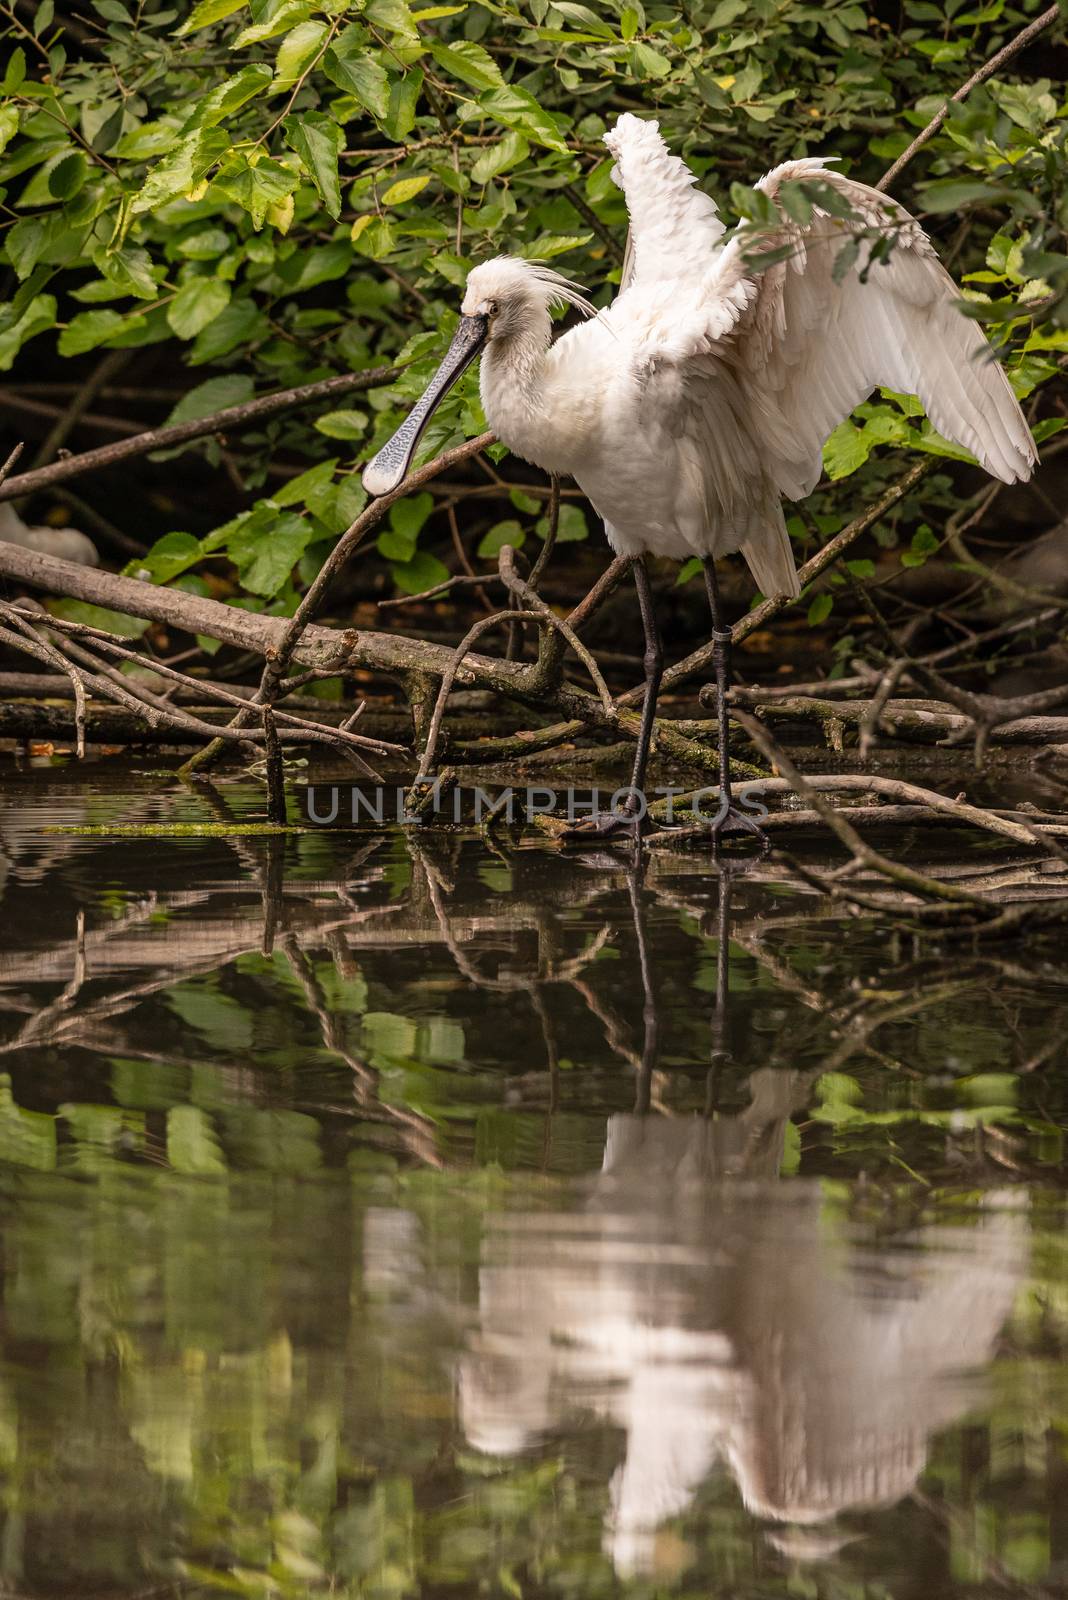 Eurasian common spoonbill opens wings reflected in a pond, image of white bird with large flat beak resting on tree branches